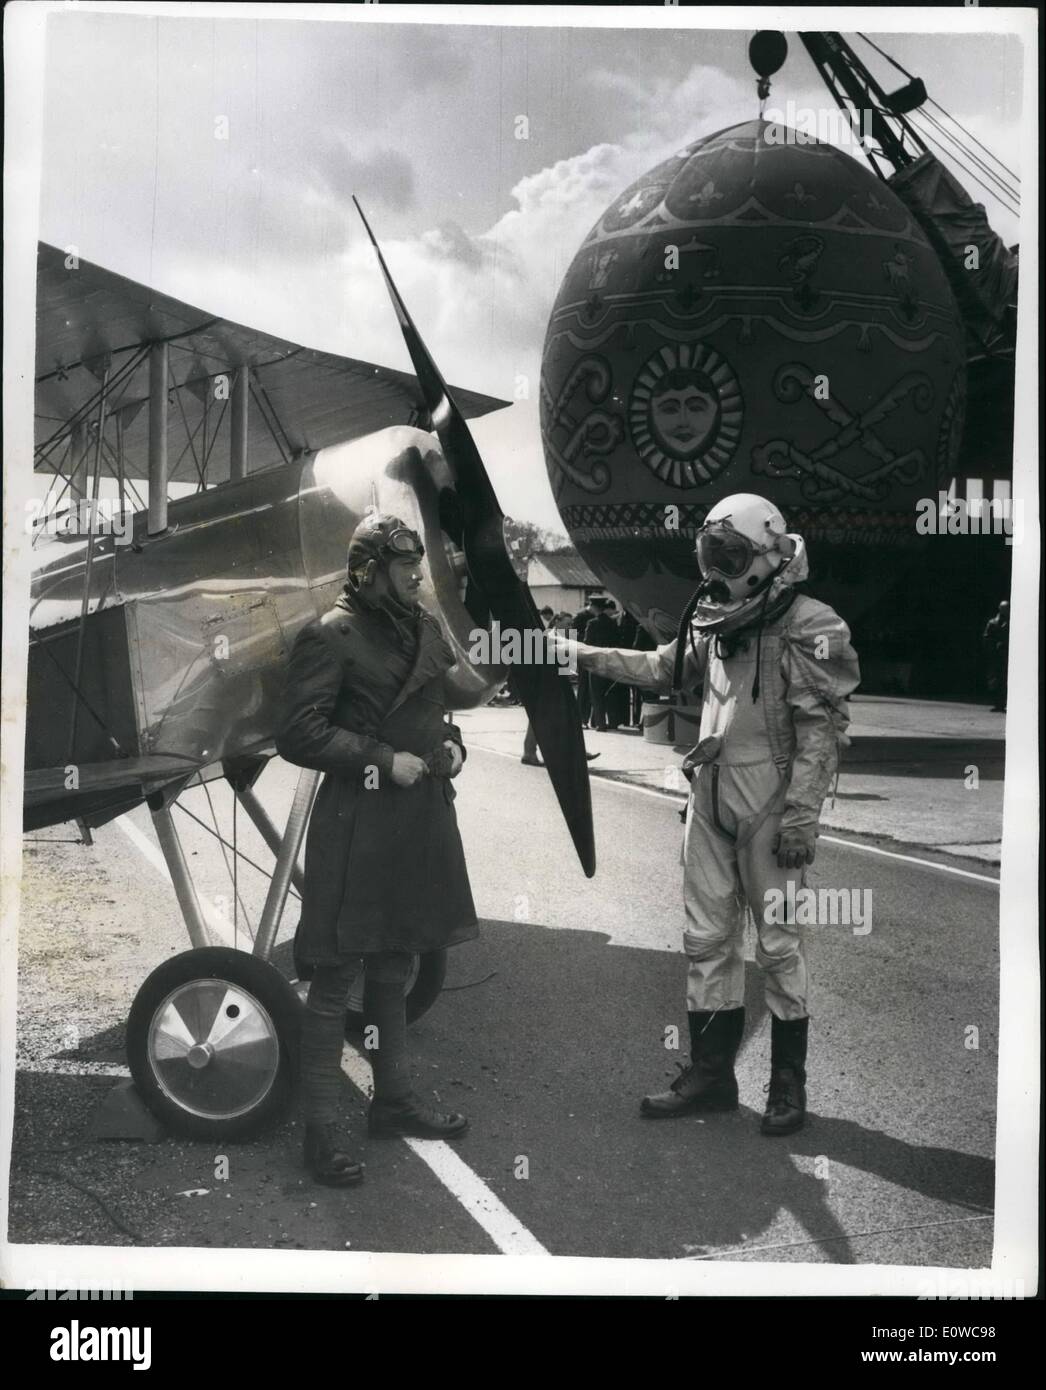 May 05, 1962 - The R.A.F. Prepares For The Royal Tournament. Fifty Years Of Aviation: ''A Cavalcade of Flying'' - is the theme of the R.A.F. contribution to the Royal Tournament which opens at Earls Court in July. It illustrates fifty years of aviation from the days of the hot-air balloon (1783) to a space-ship of the future. The ''Space-ship'' has been constructed by men of the R.A.F. from Unserviceable nose-cones -paint tin s etc.- at a cost of nothing. The display was open to members of the Press at Kenley, Surrey today. Photo shows ''Spaceman'' - S.A.C Stock Photo